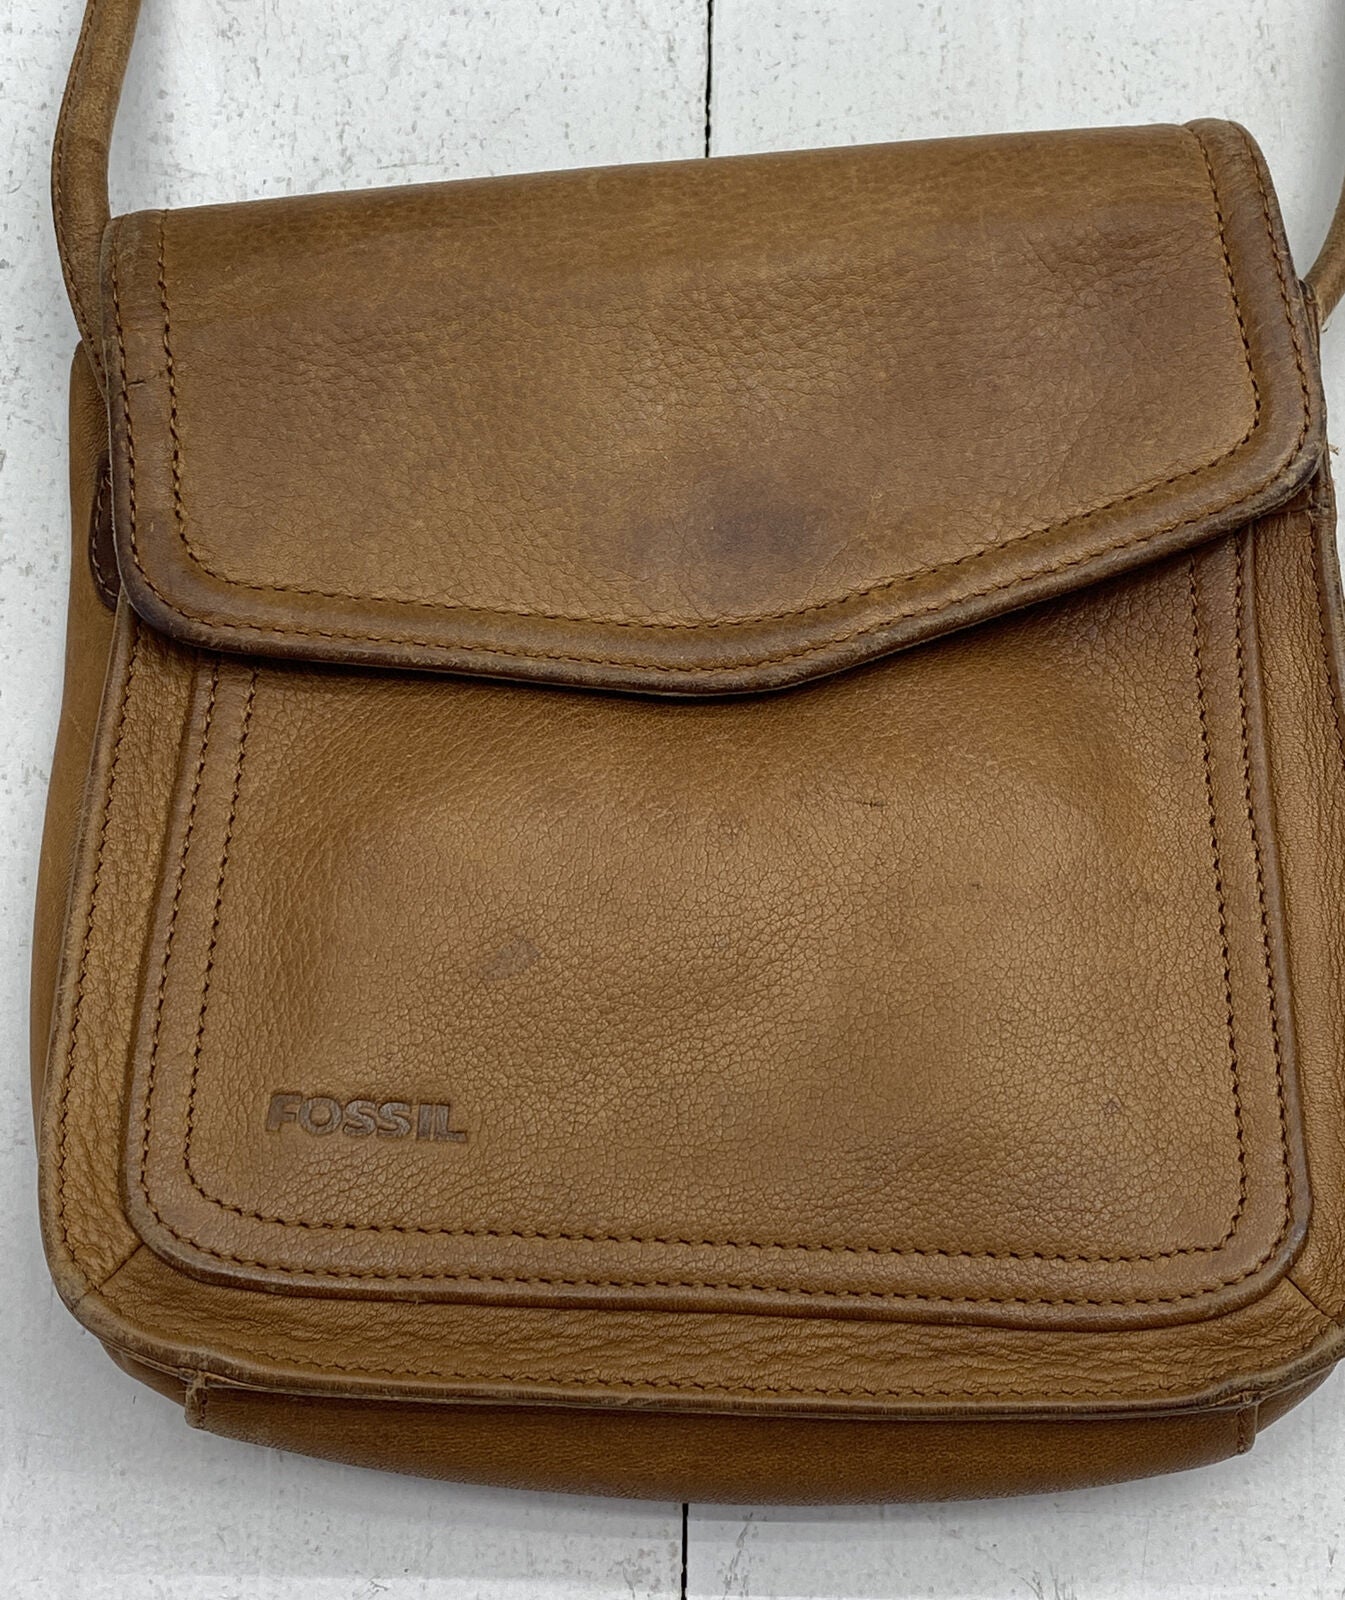 Small Fossil purse in good condition, Women's Fashion, Bags & Wallets,  Cross-body Bags on Carousell